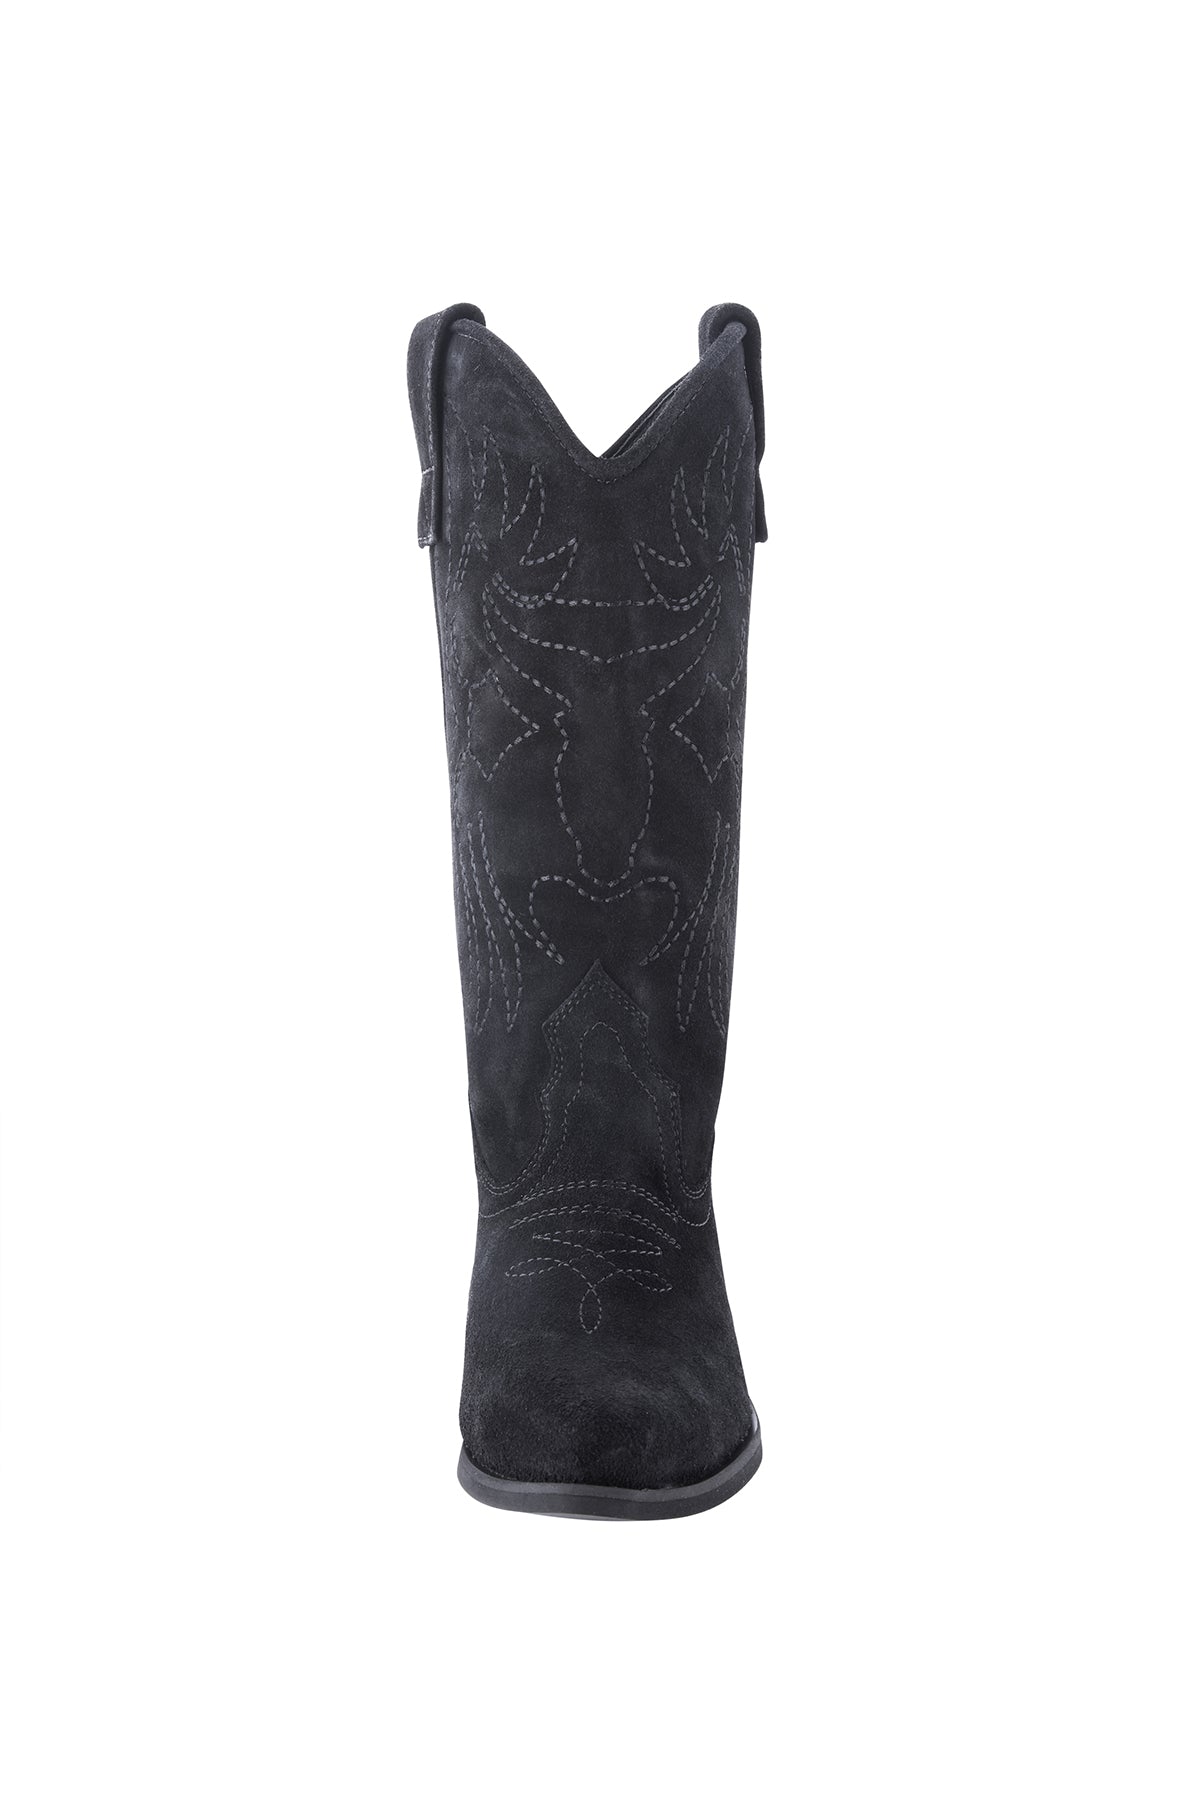 EMBROIDERED BLACK SUEDE BOOT